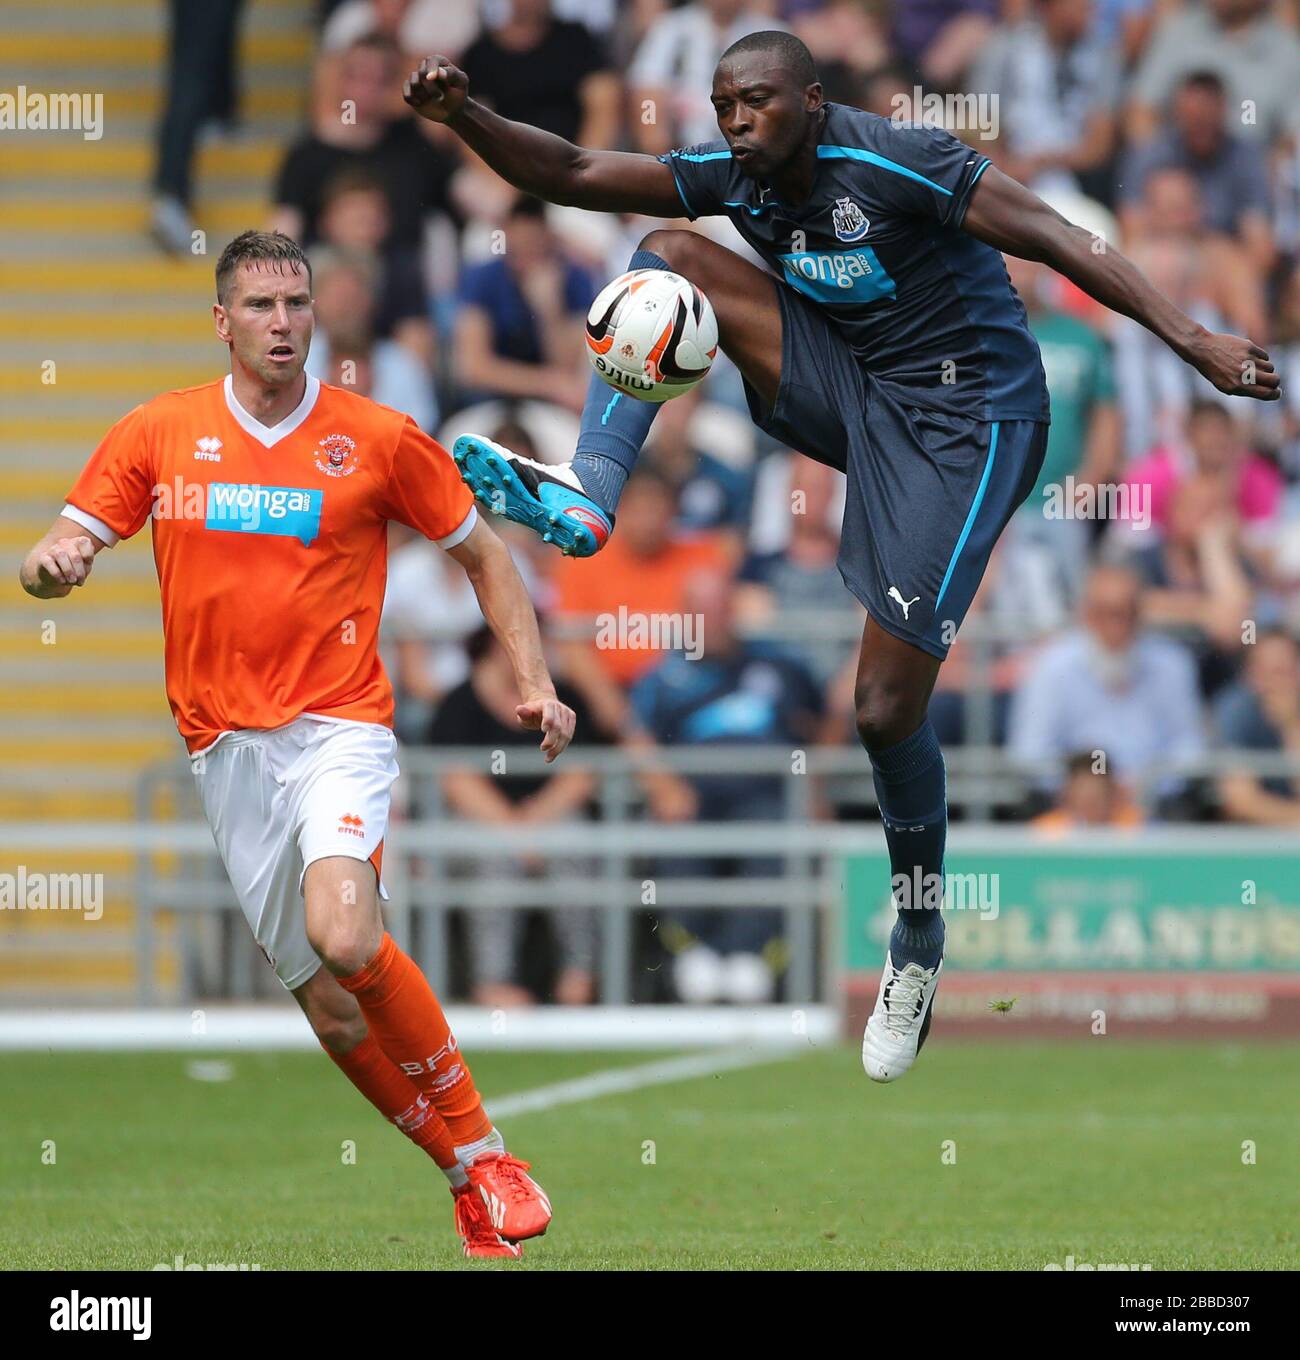 Newcastle United's Shola Ameobi controls the high ball in front of Blackpool defender Kirk Broadfoot Stock Photo